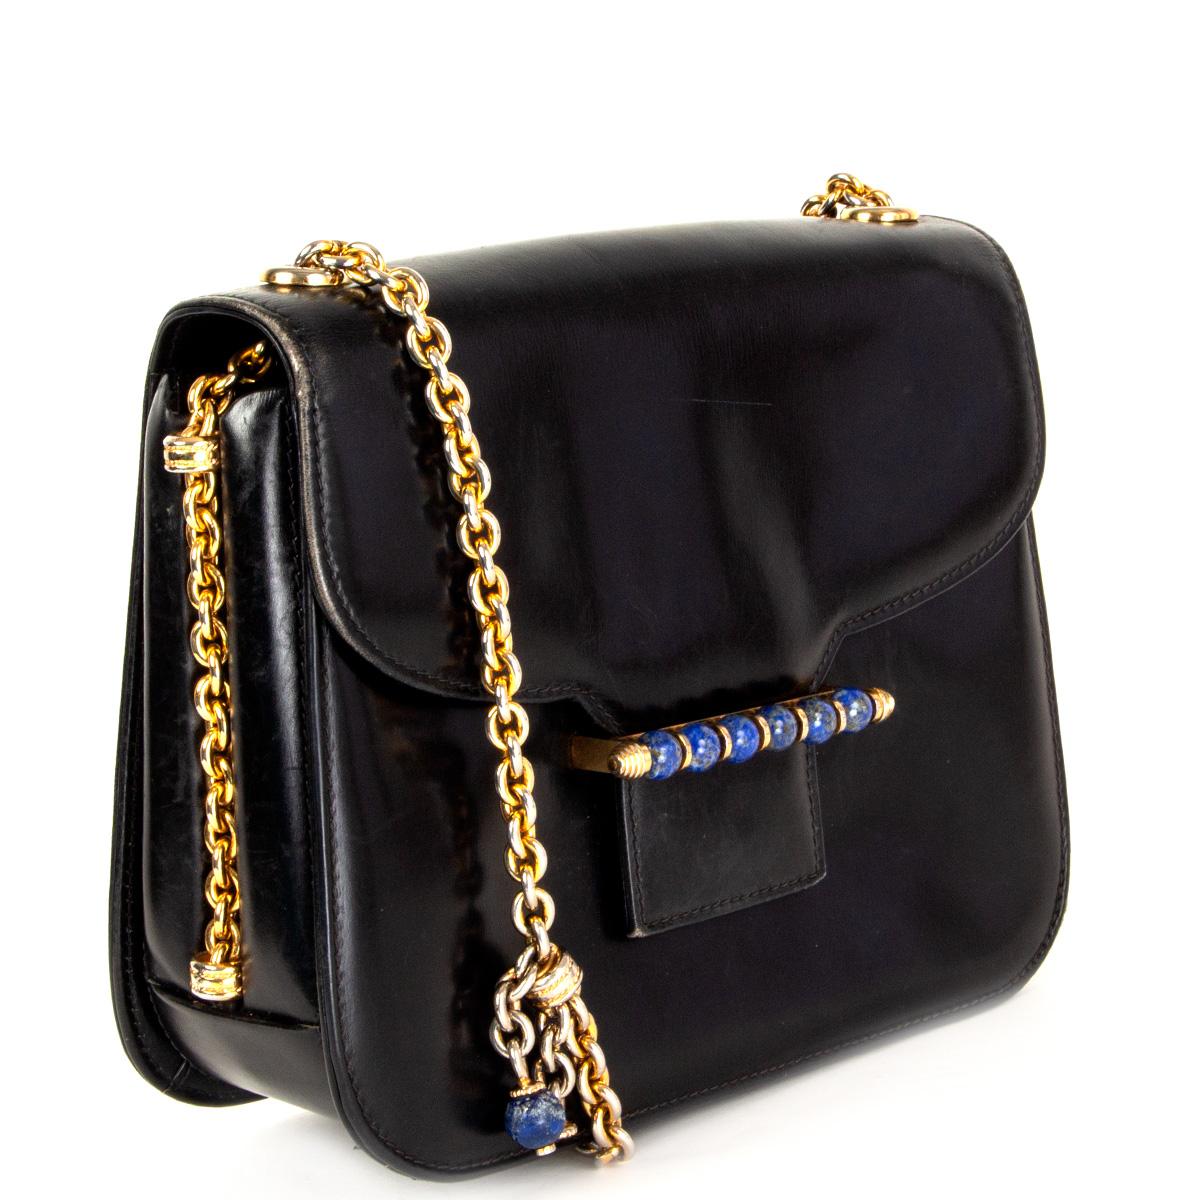 100% authentic Gucci Vintage Lapis Lazuli embellished shoulder bag (ca. 1960) in black box leather featuring gold-tone chain shoulder-strap and Lapis Lazuli embellishment at front. Lined in black leather with one zipper pocket against the back, two